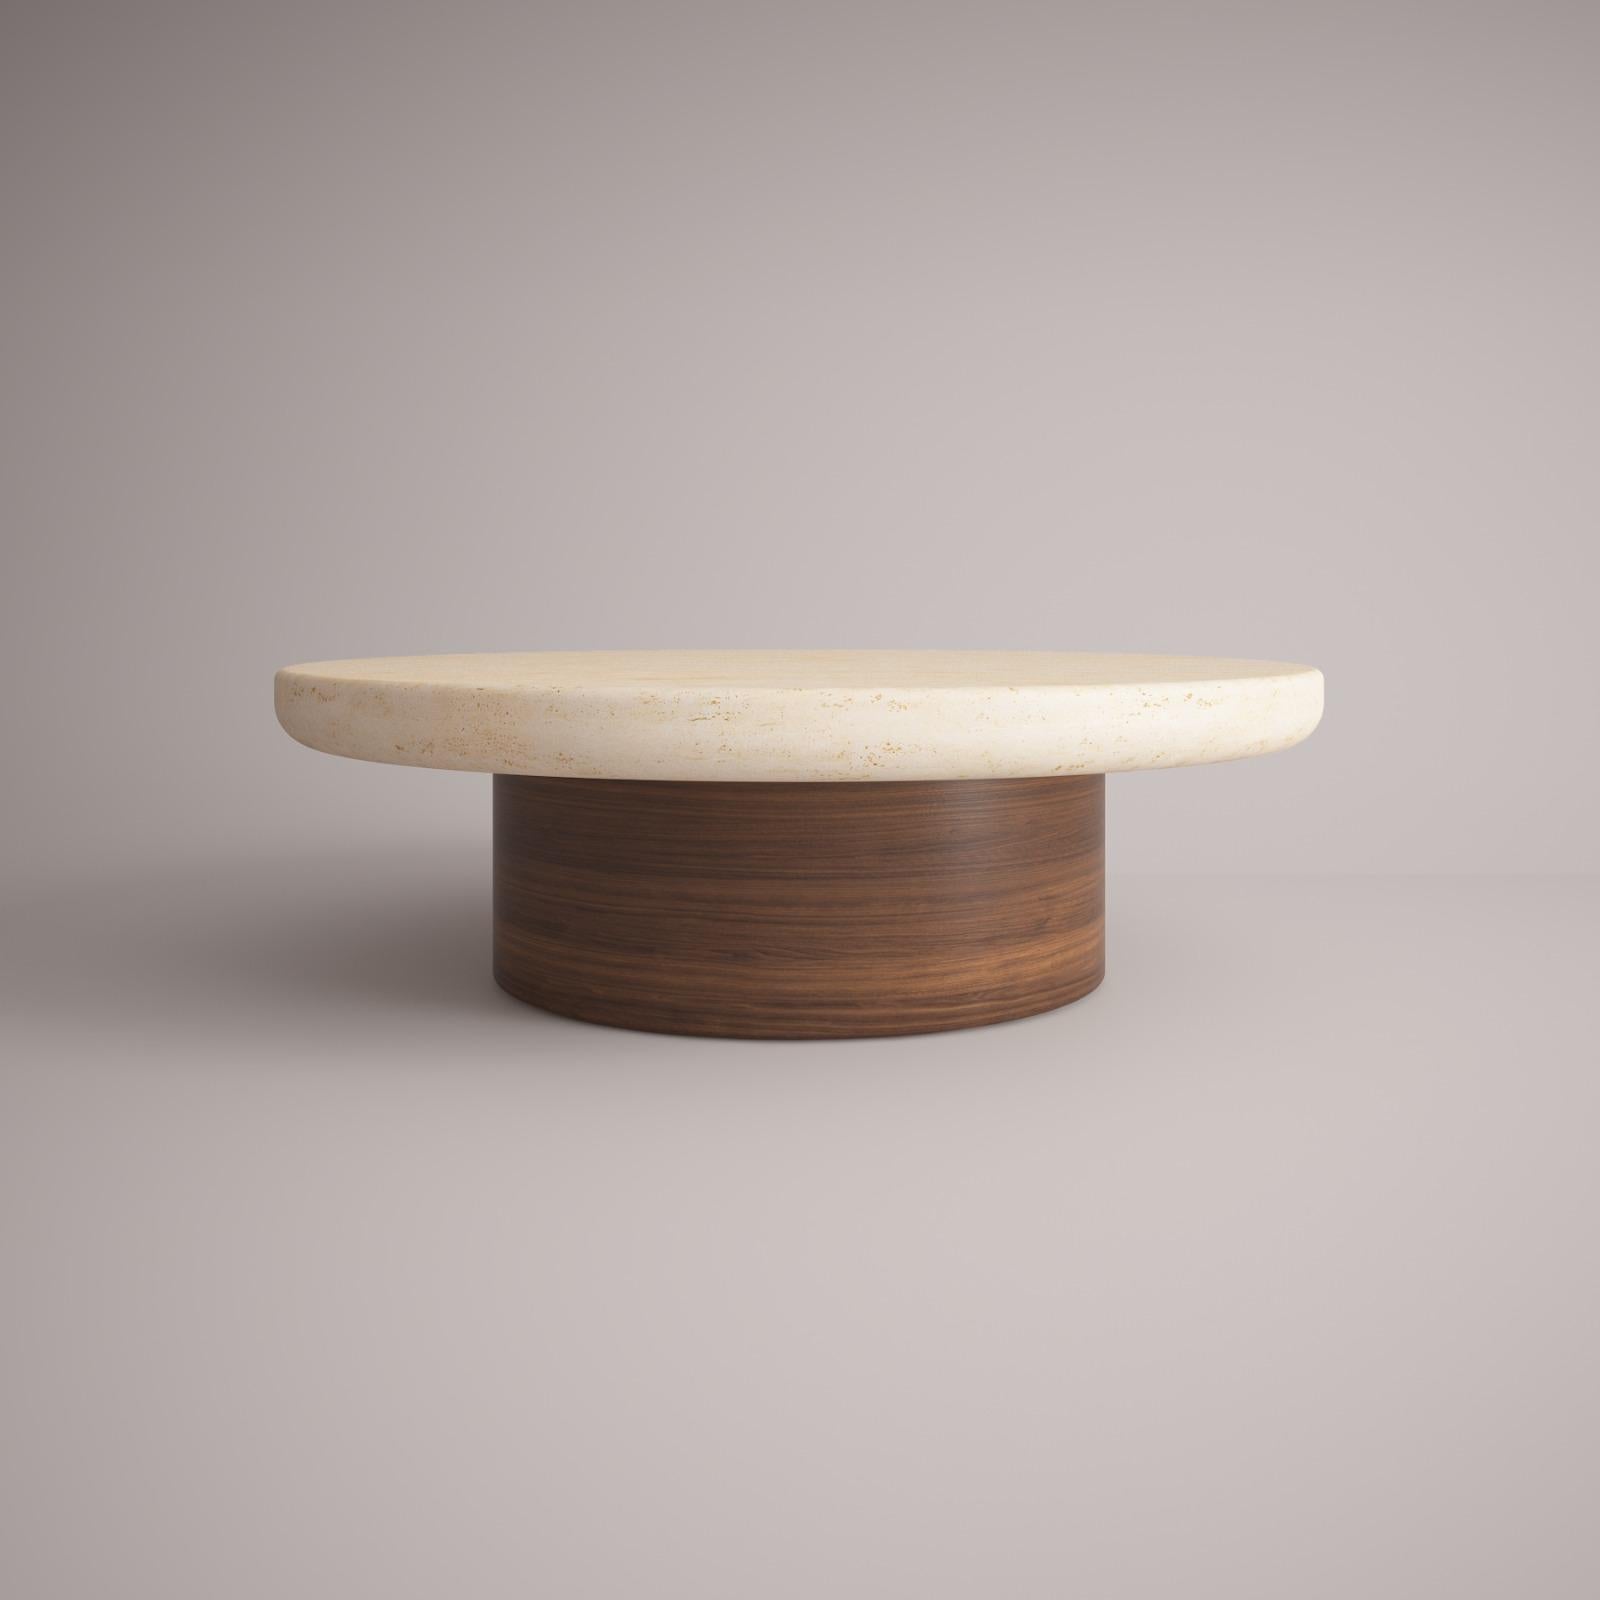 Lessa - 21st century European center table Designed by Studio Rig Travertino Wood

Collector brand was born and Portugal and aims to be part of daily life by fusing furniture to home routines and lifestyles. The company designs its pieces with the